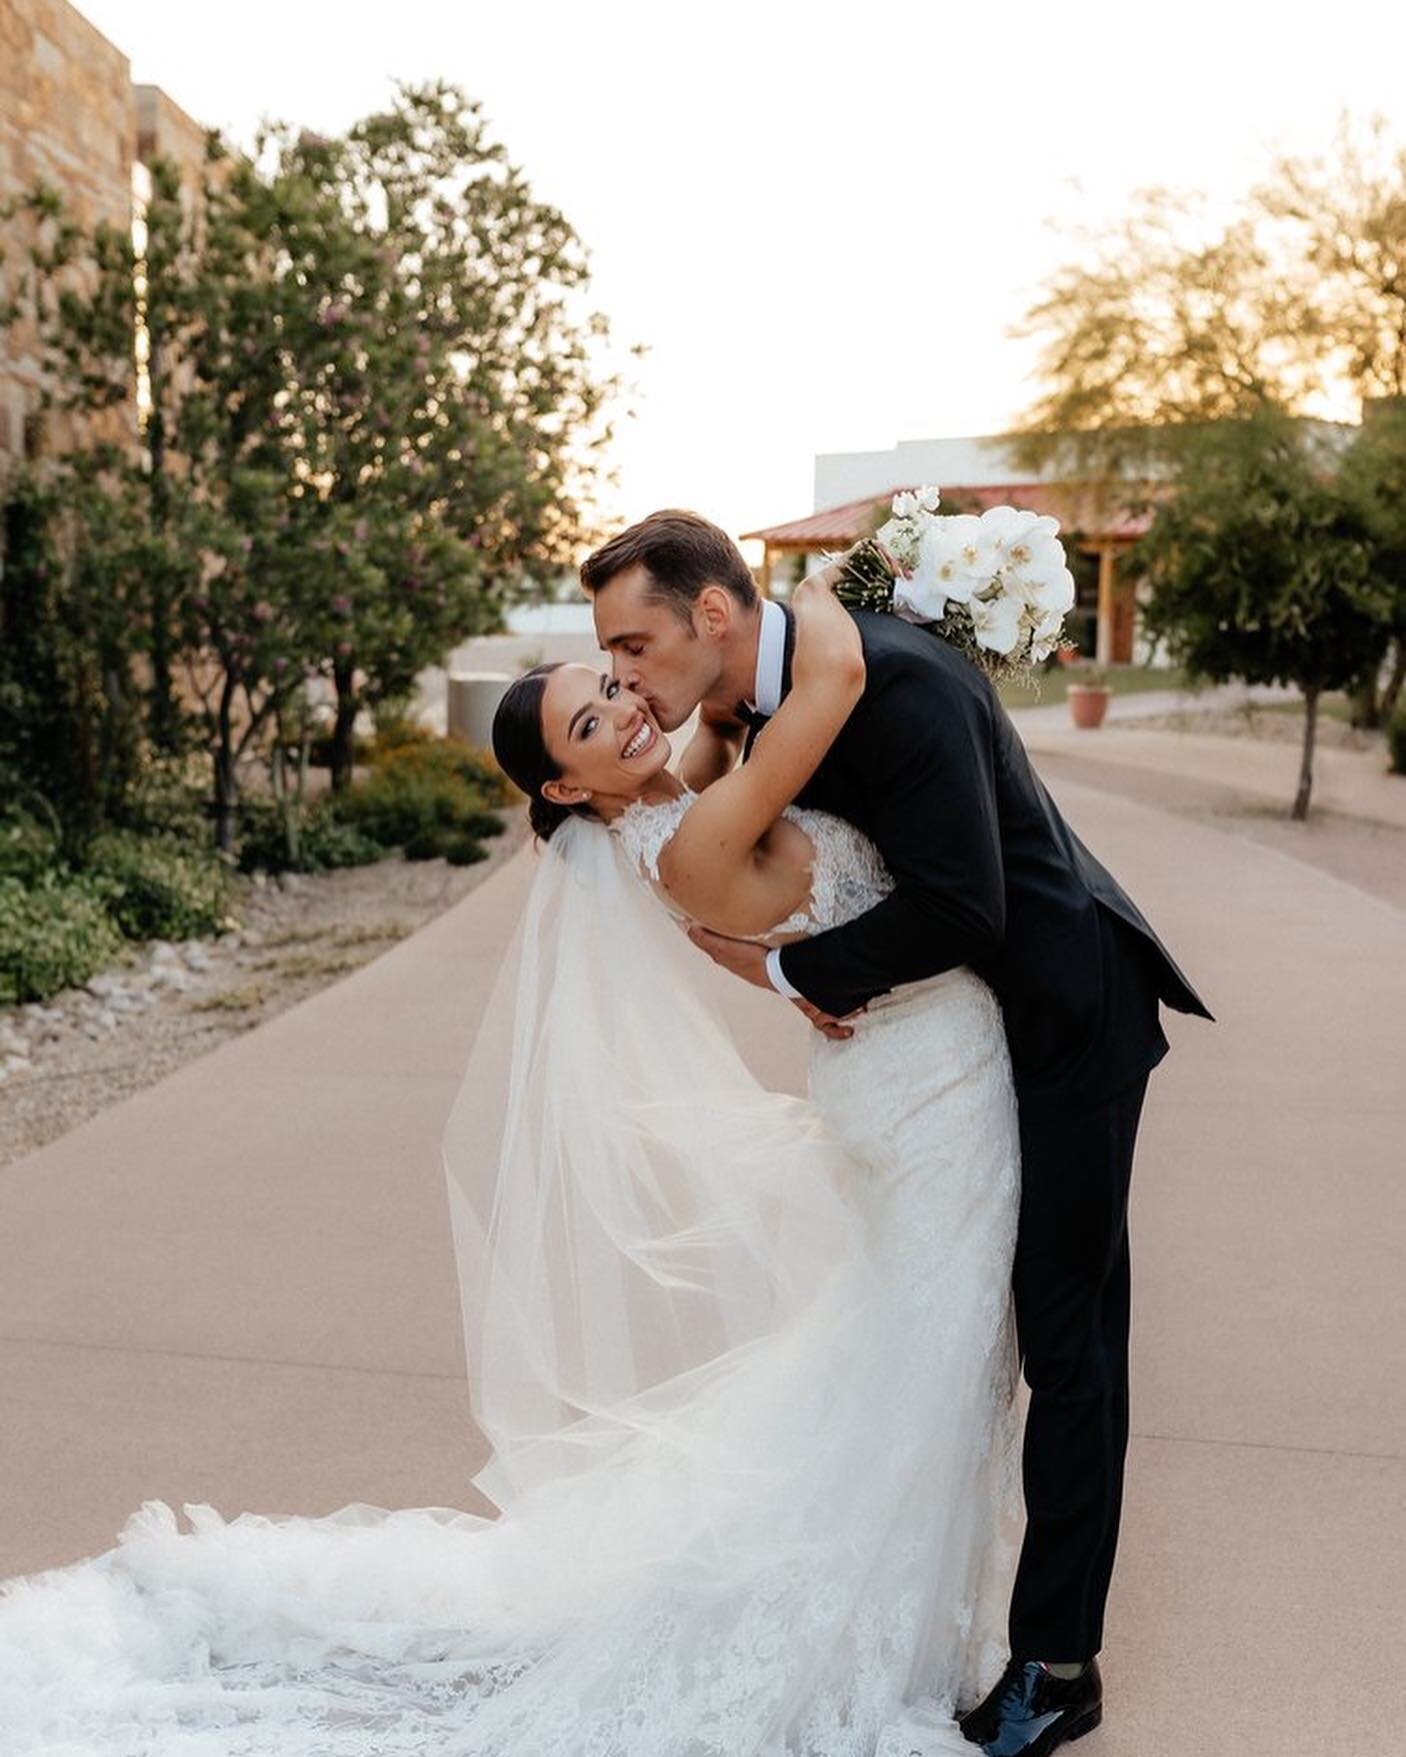 obsessed with them, and the joy RADIATING out of Elena, setting the bar on how happy you should be moments after vowing on forever 🥲
.
photo: @madi.aldy.photo 
planning: @gatheringsbyelle